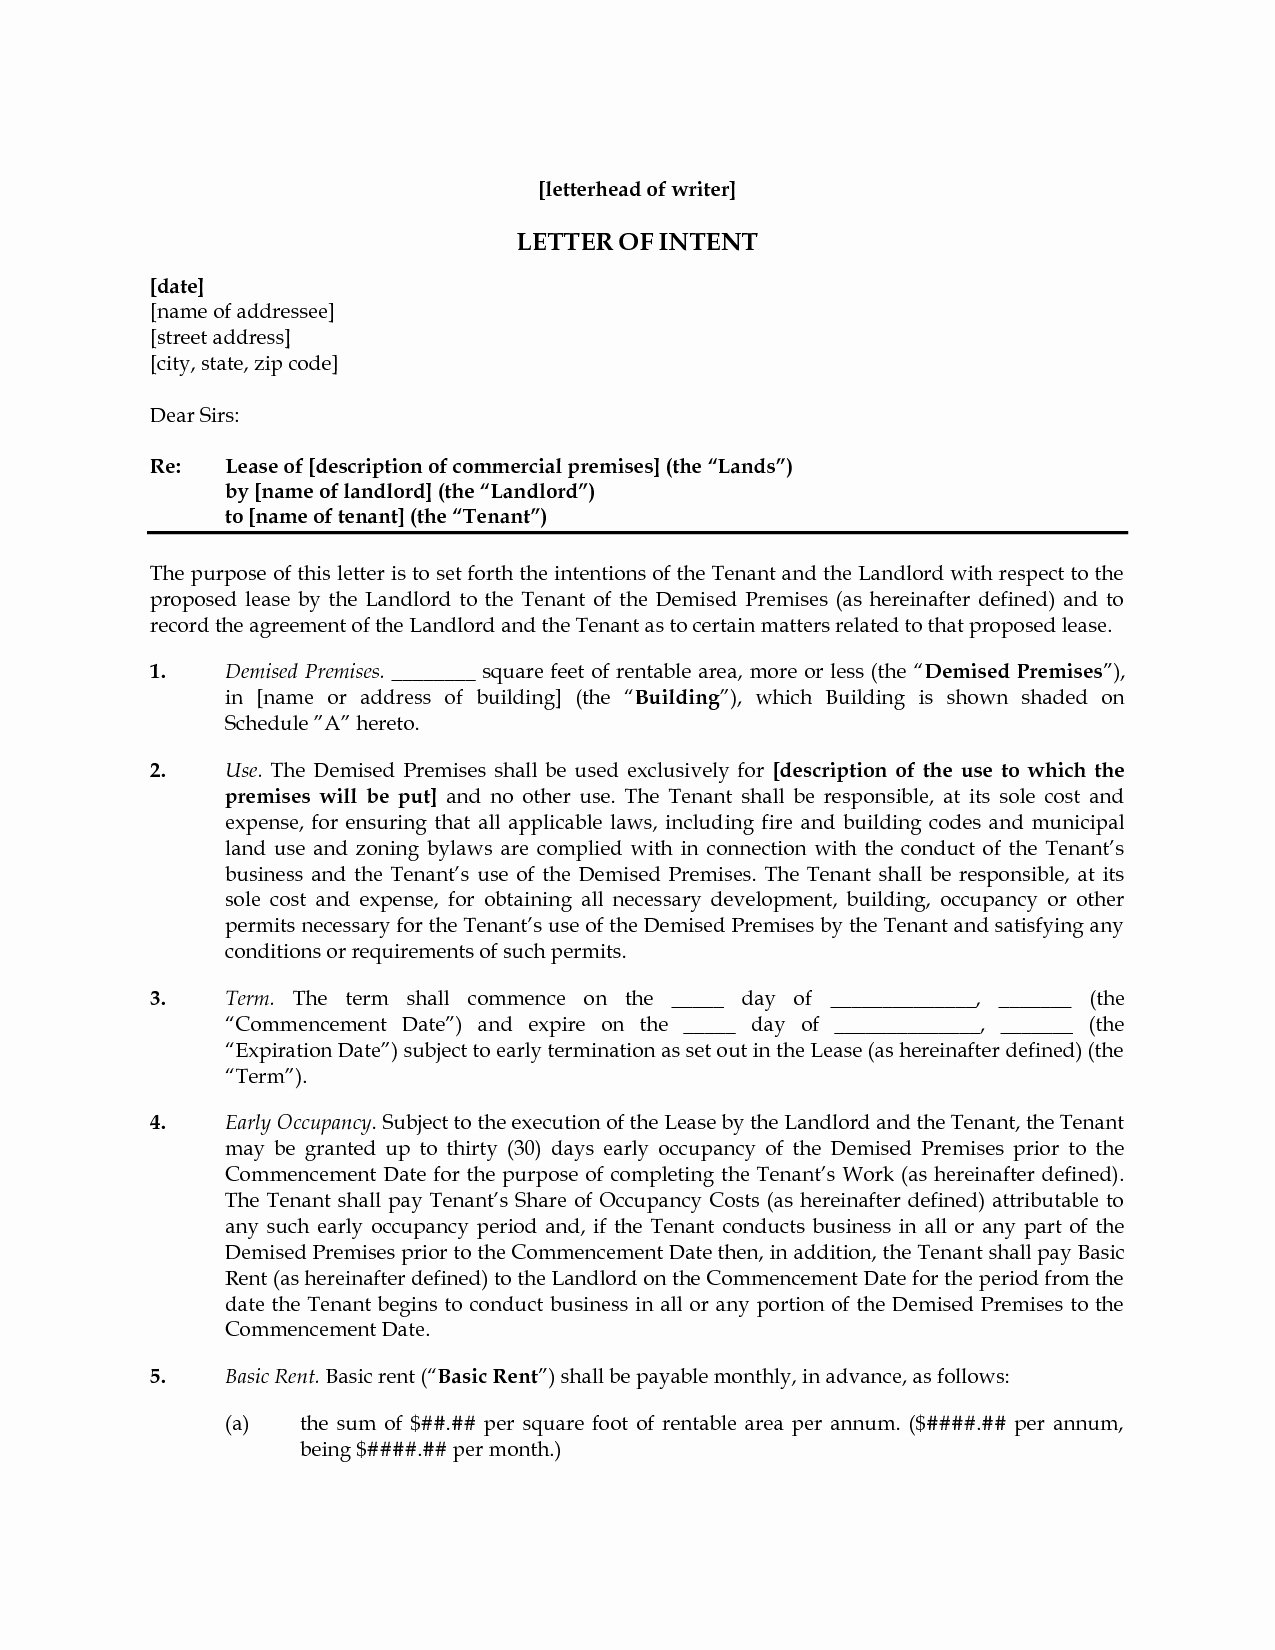 Sample Letter Of Intent to Lease Elegant Letter Intent to Lease Mercial Space Template